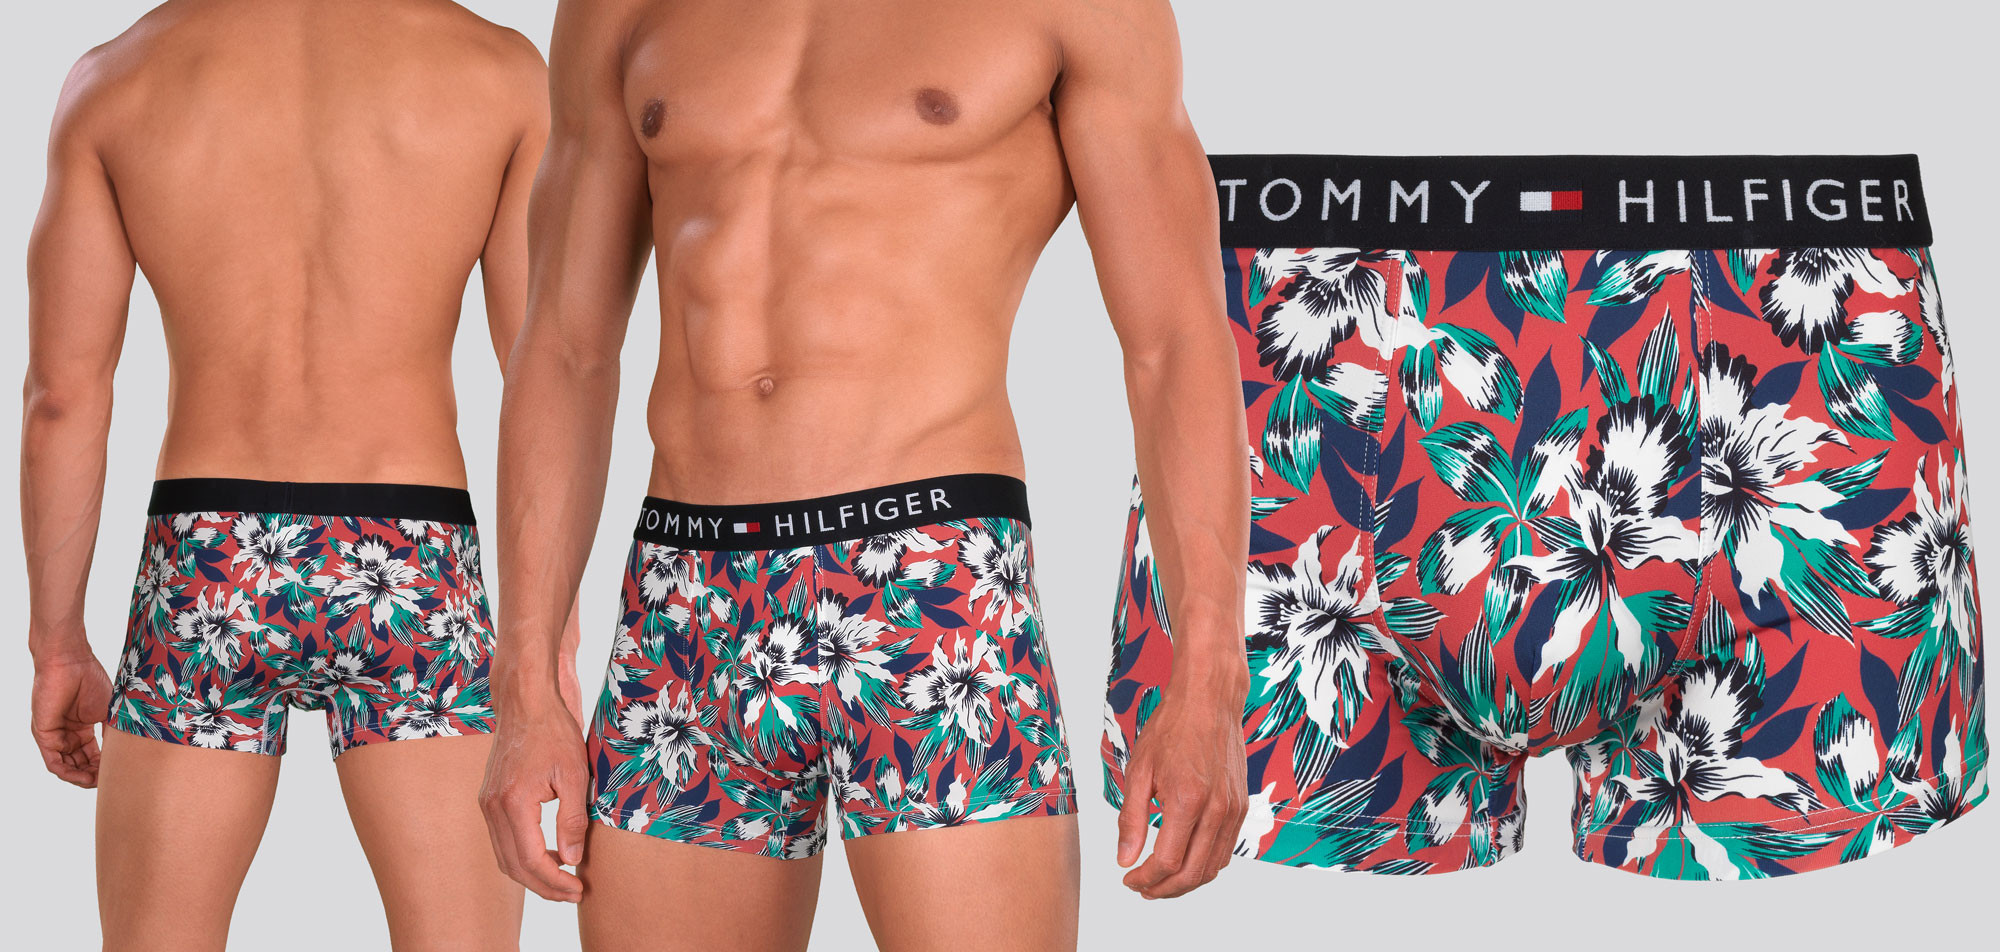 Tommy Hilfiger Microfiber Trunk 821 Tropical Floral Frosted Print,